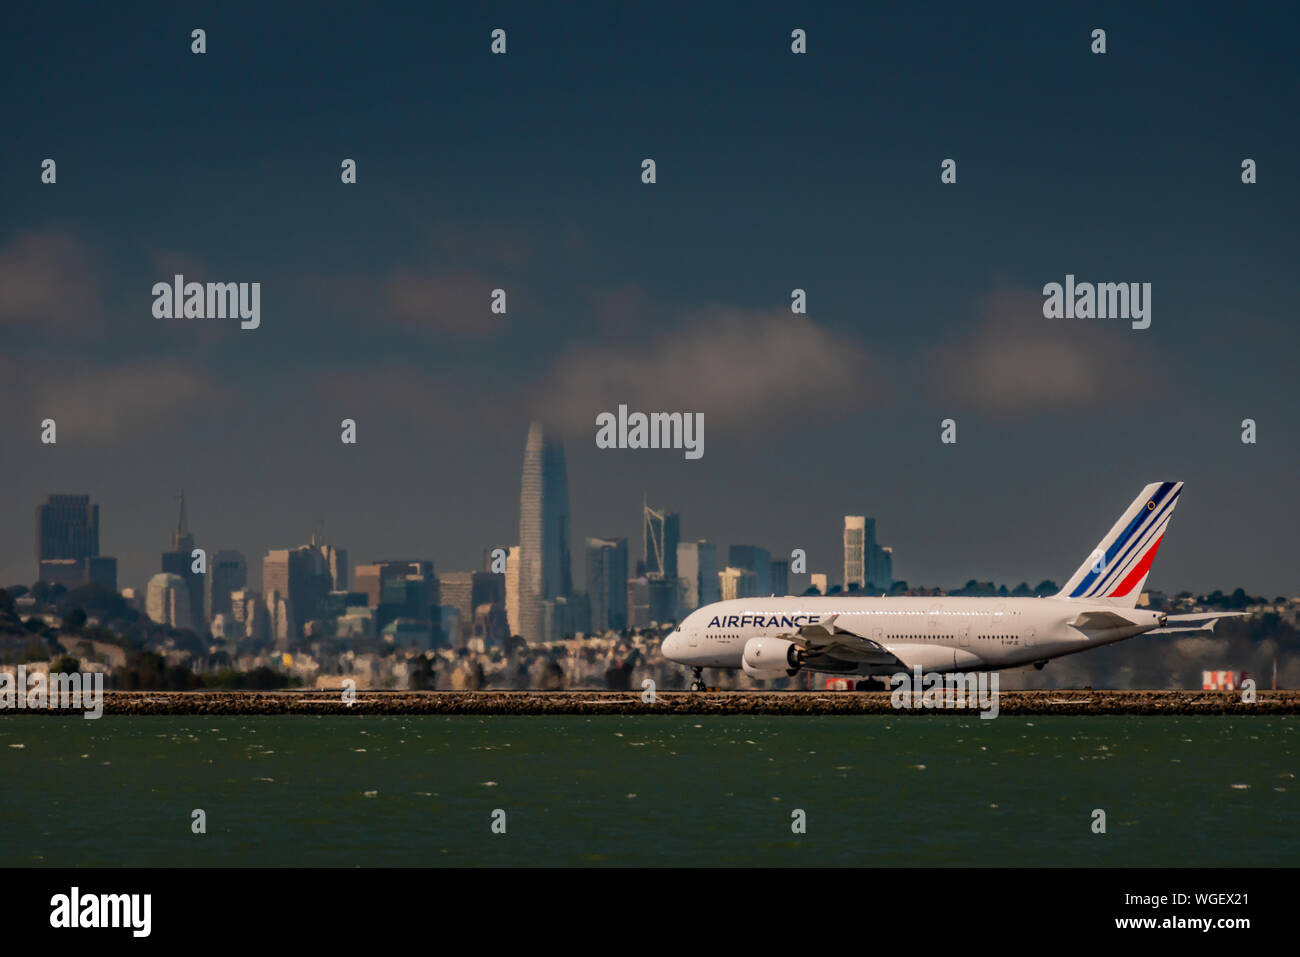 Air France A380 arriving San Francisco skyline in background Stock Photo